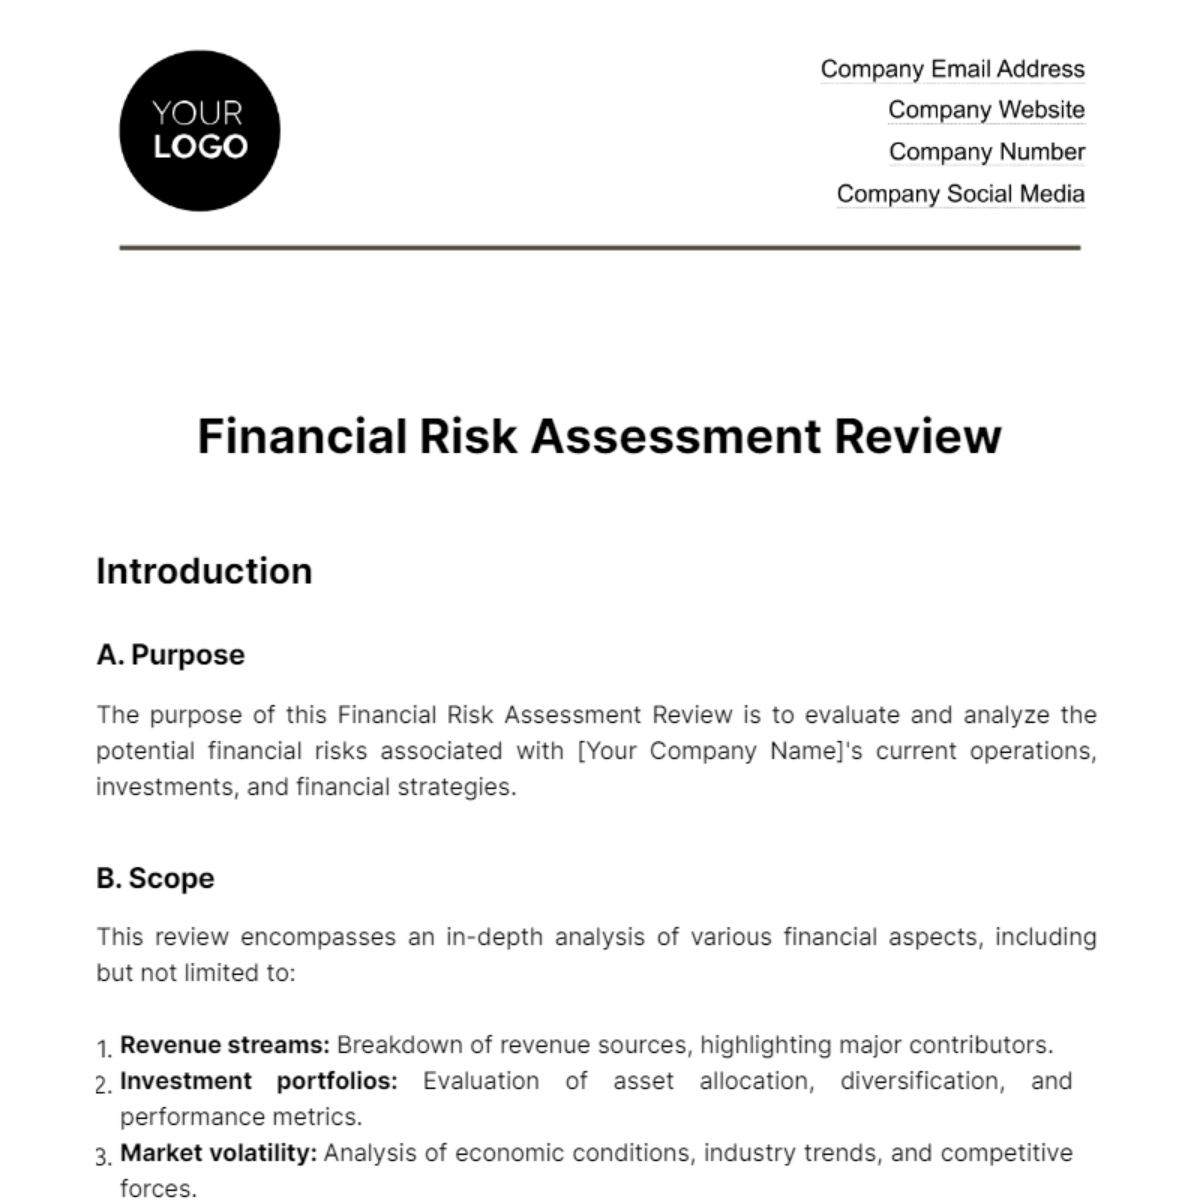 Free Financial Risk Assessment Review Template